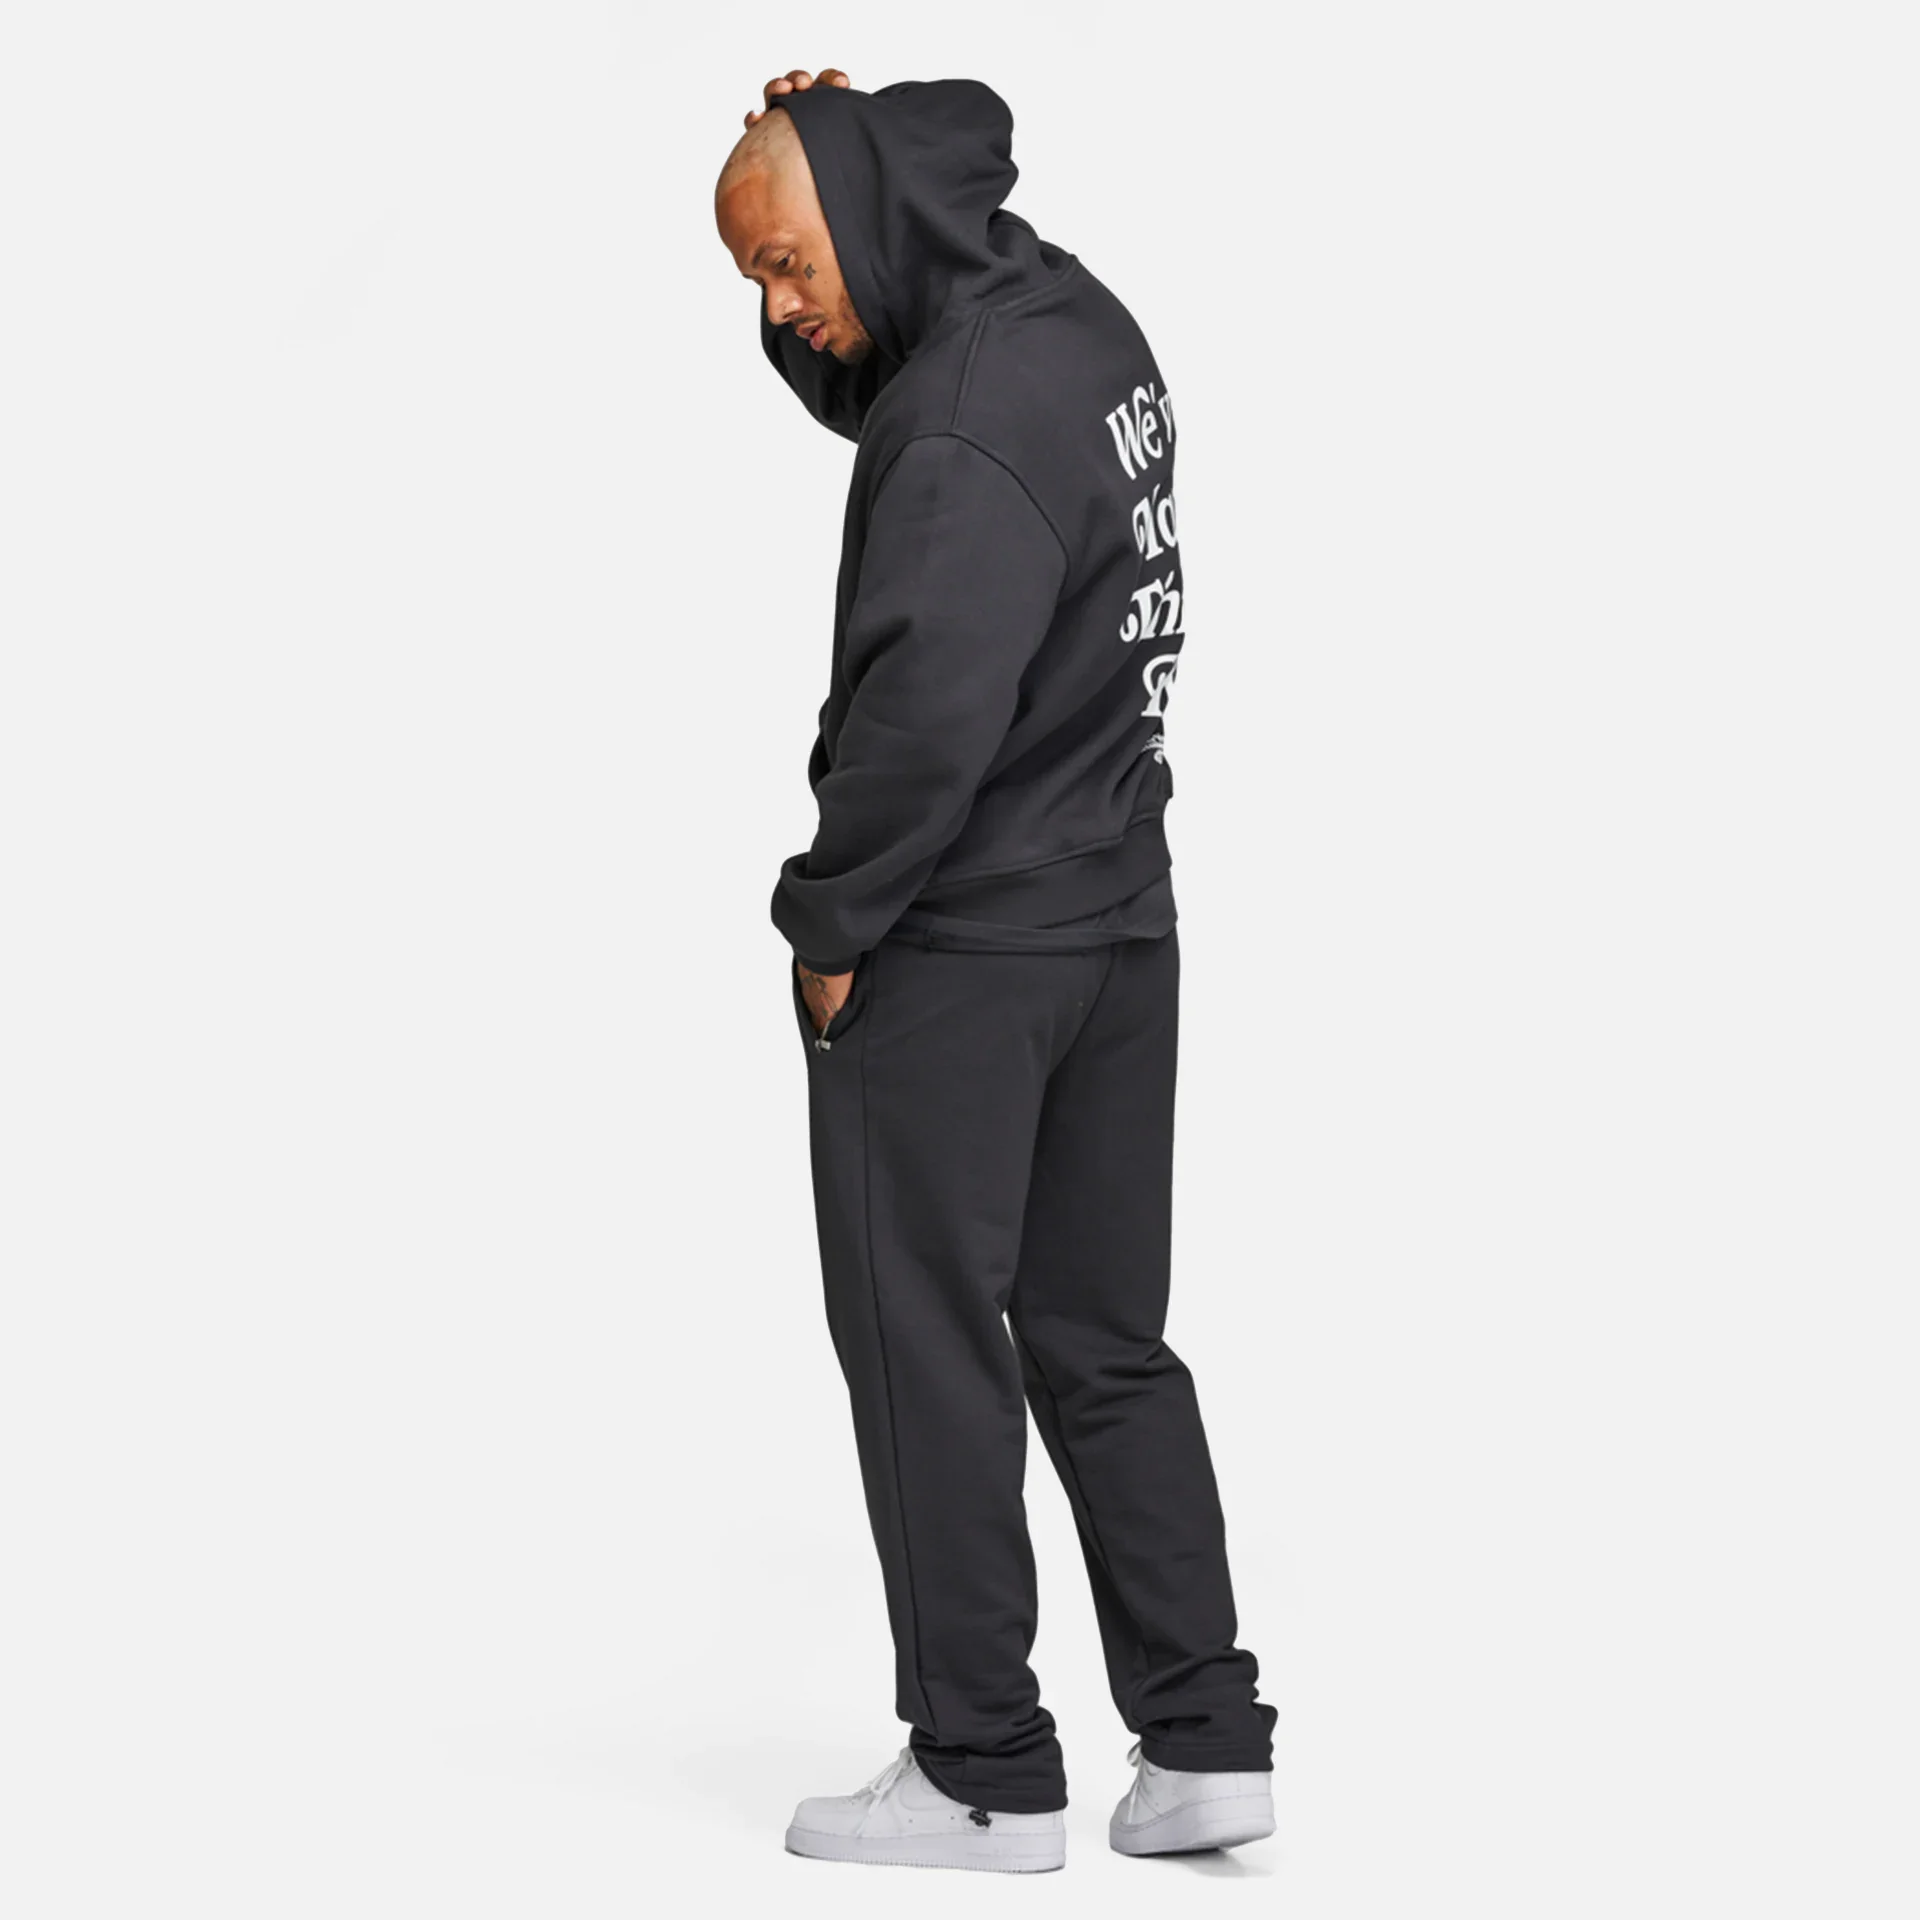 Fast and Bright Kid Hoodie Washed Black